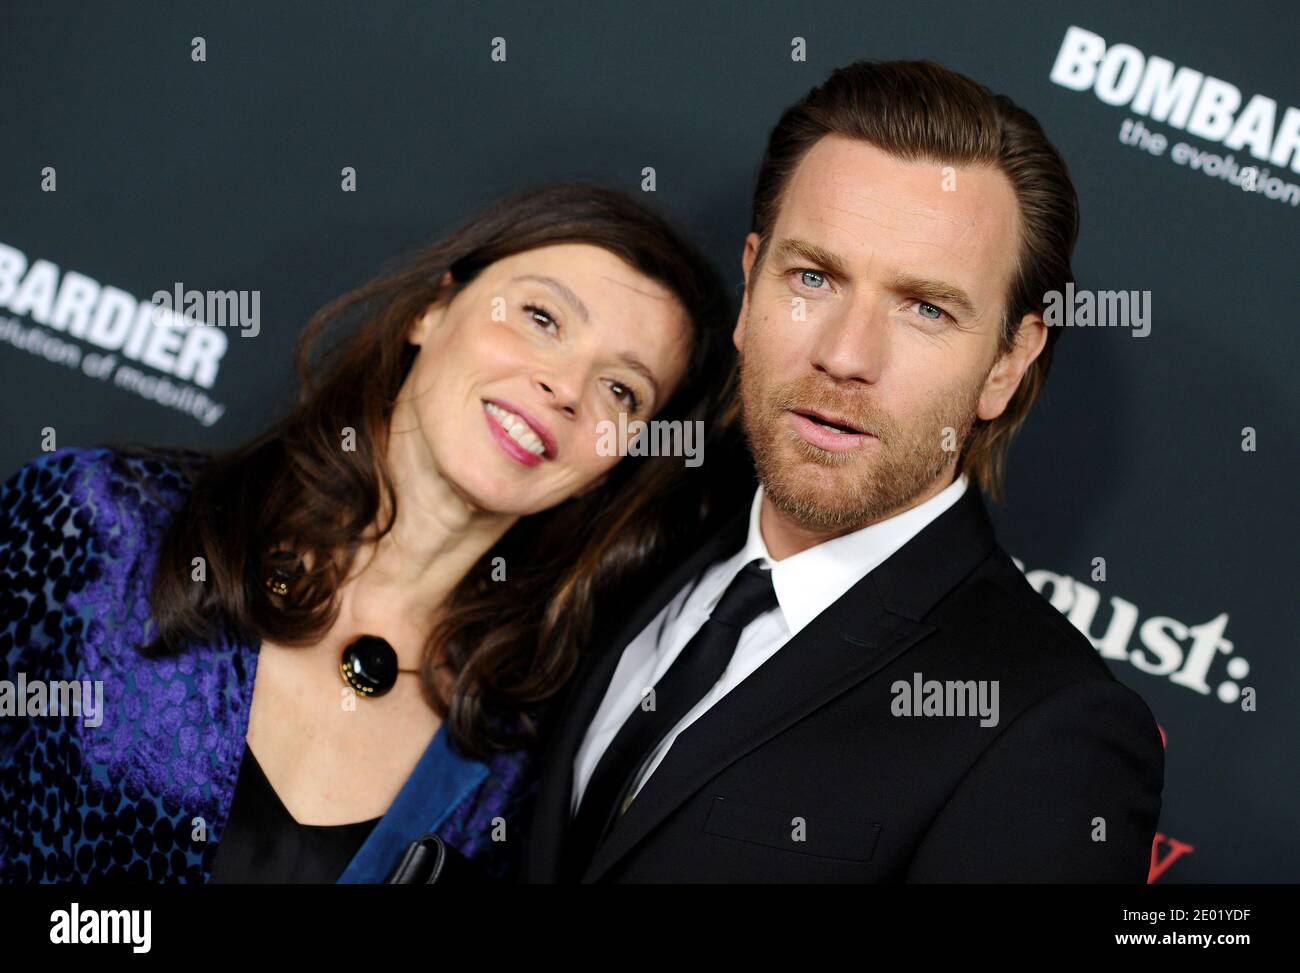 Ewan McGregor and Eve Mavrakis arrive at the premiere of The Weinstein Company's 'August: Osage County' at Regal Cinemas L.A. Live in Los Angeles, CA, USA on December 16, 2013. Photo by Lionel Hahn/ABACAPRESS.COM Stock Photo